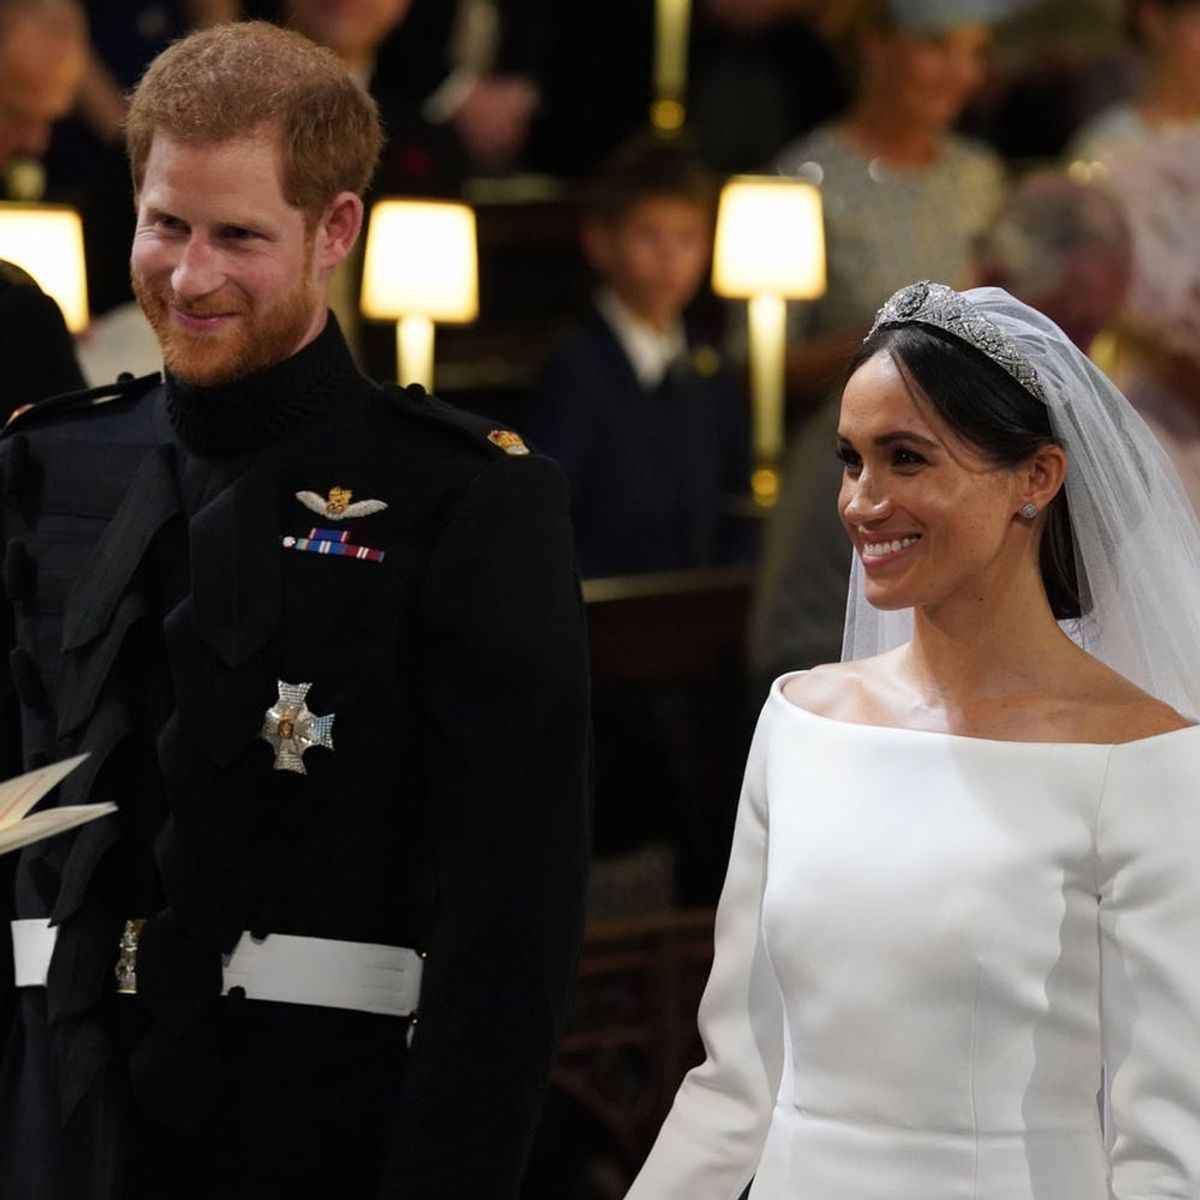 Royal Wedding: Prince Harry and Meghan Markle Are Officially Married!